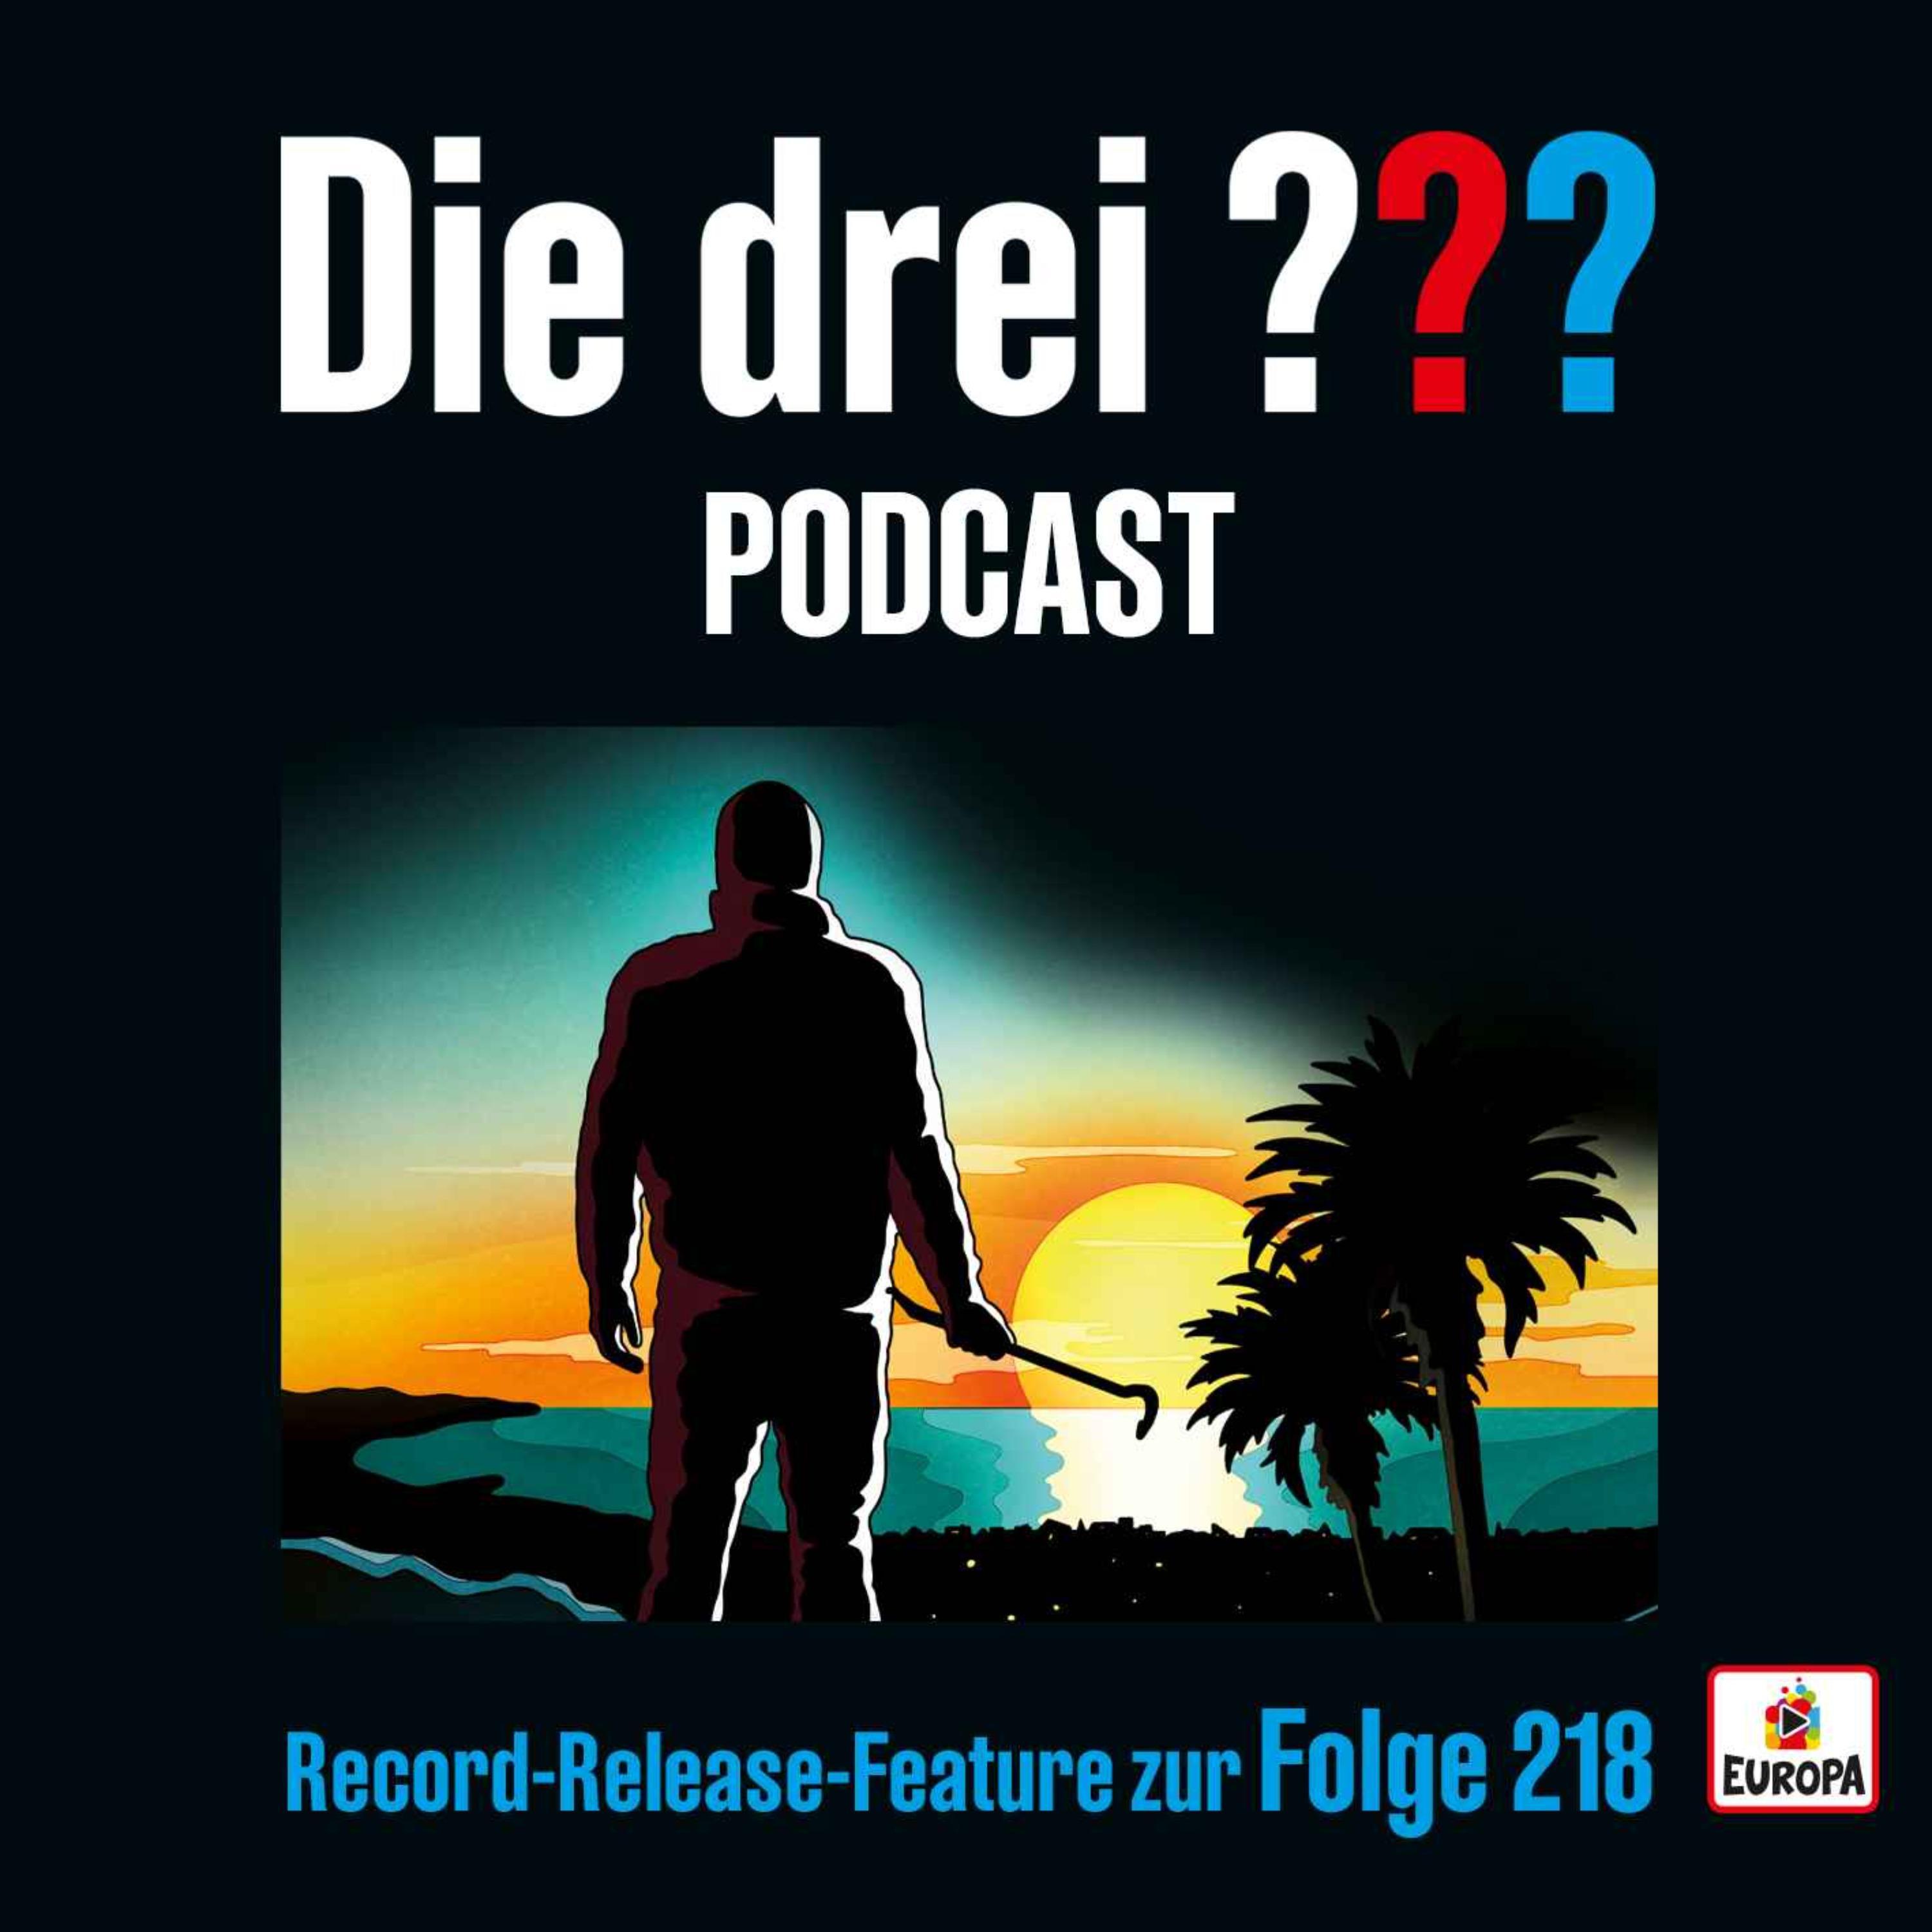 Record-Release-Feature zur Folge 218